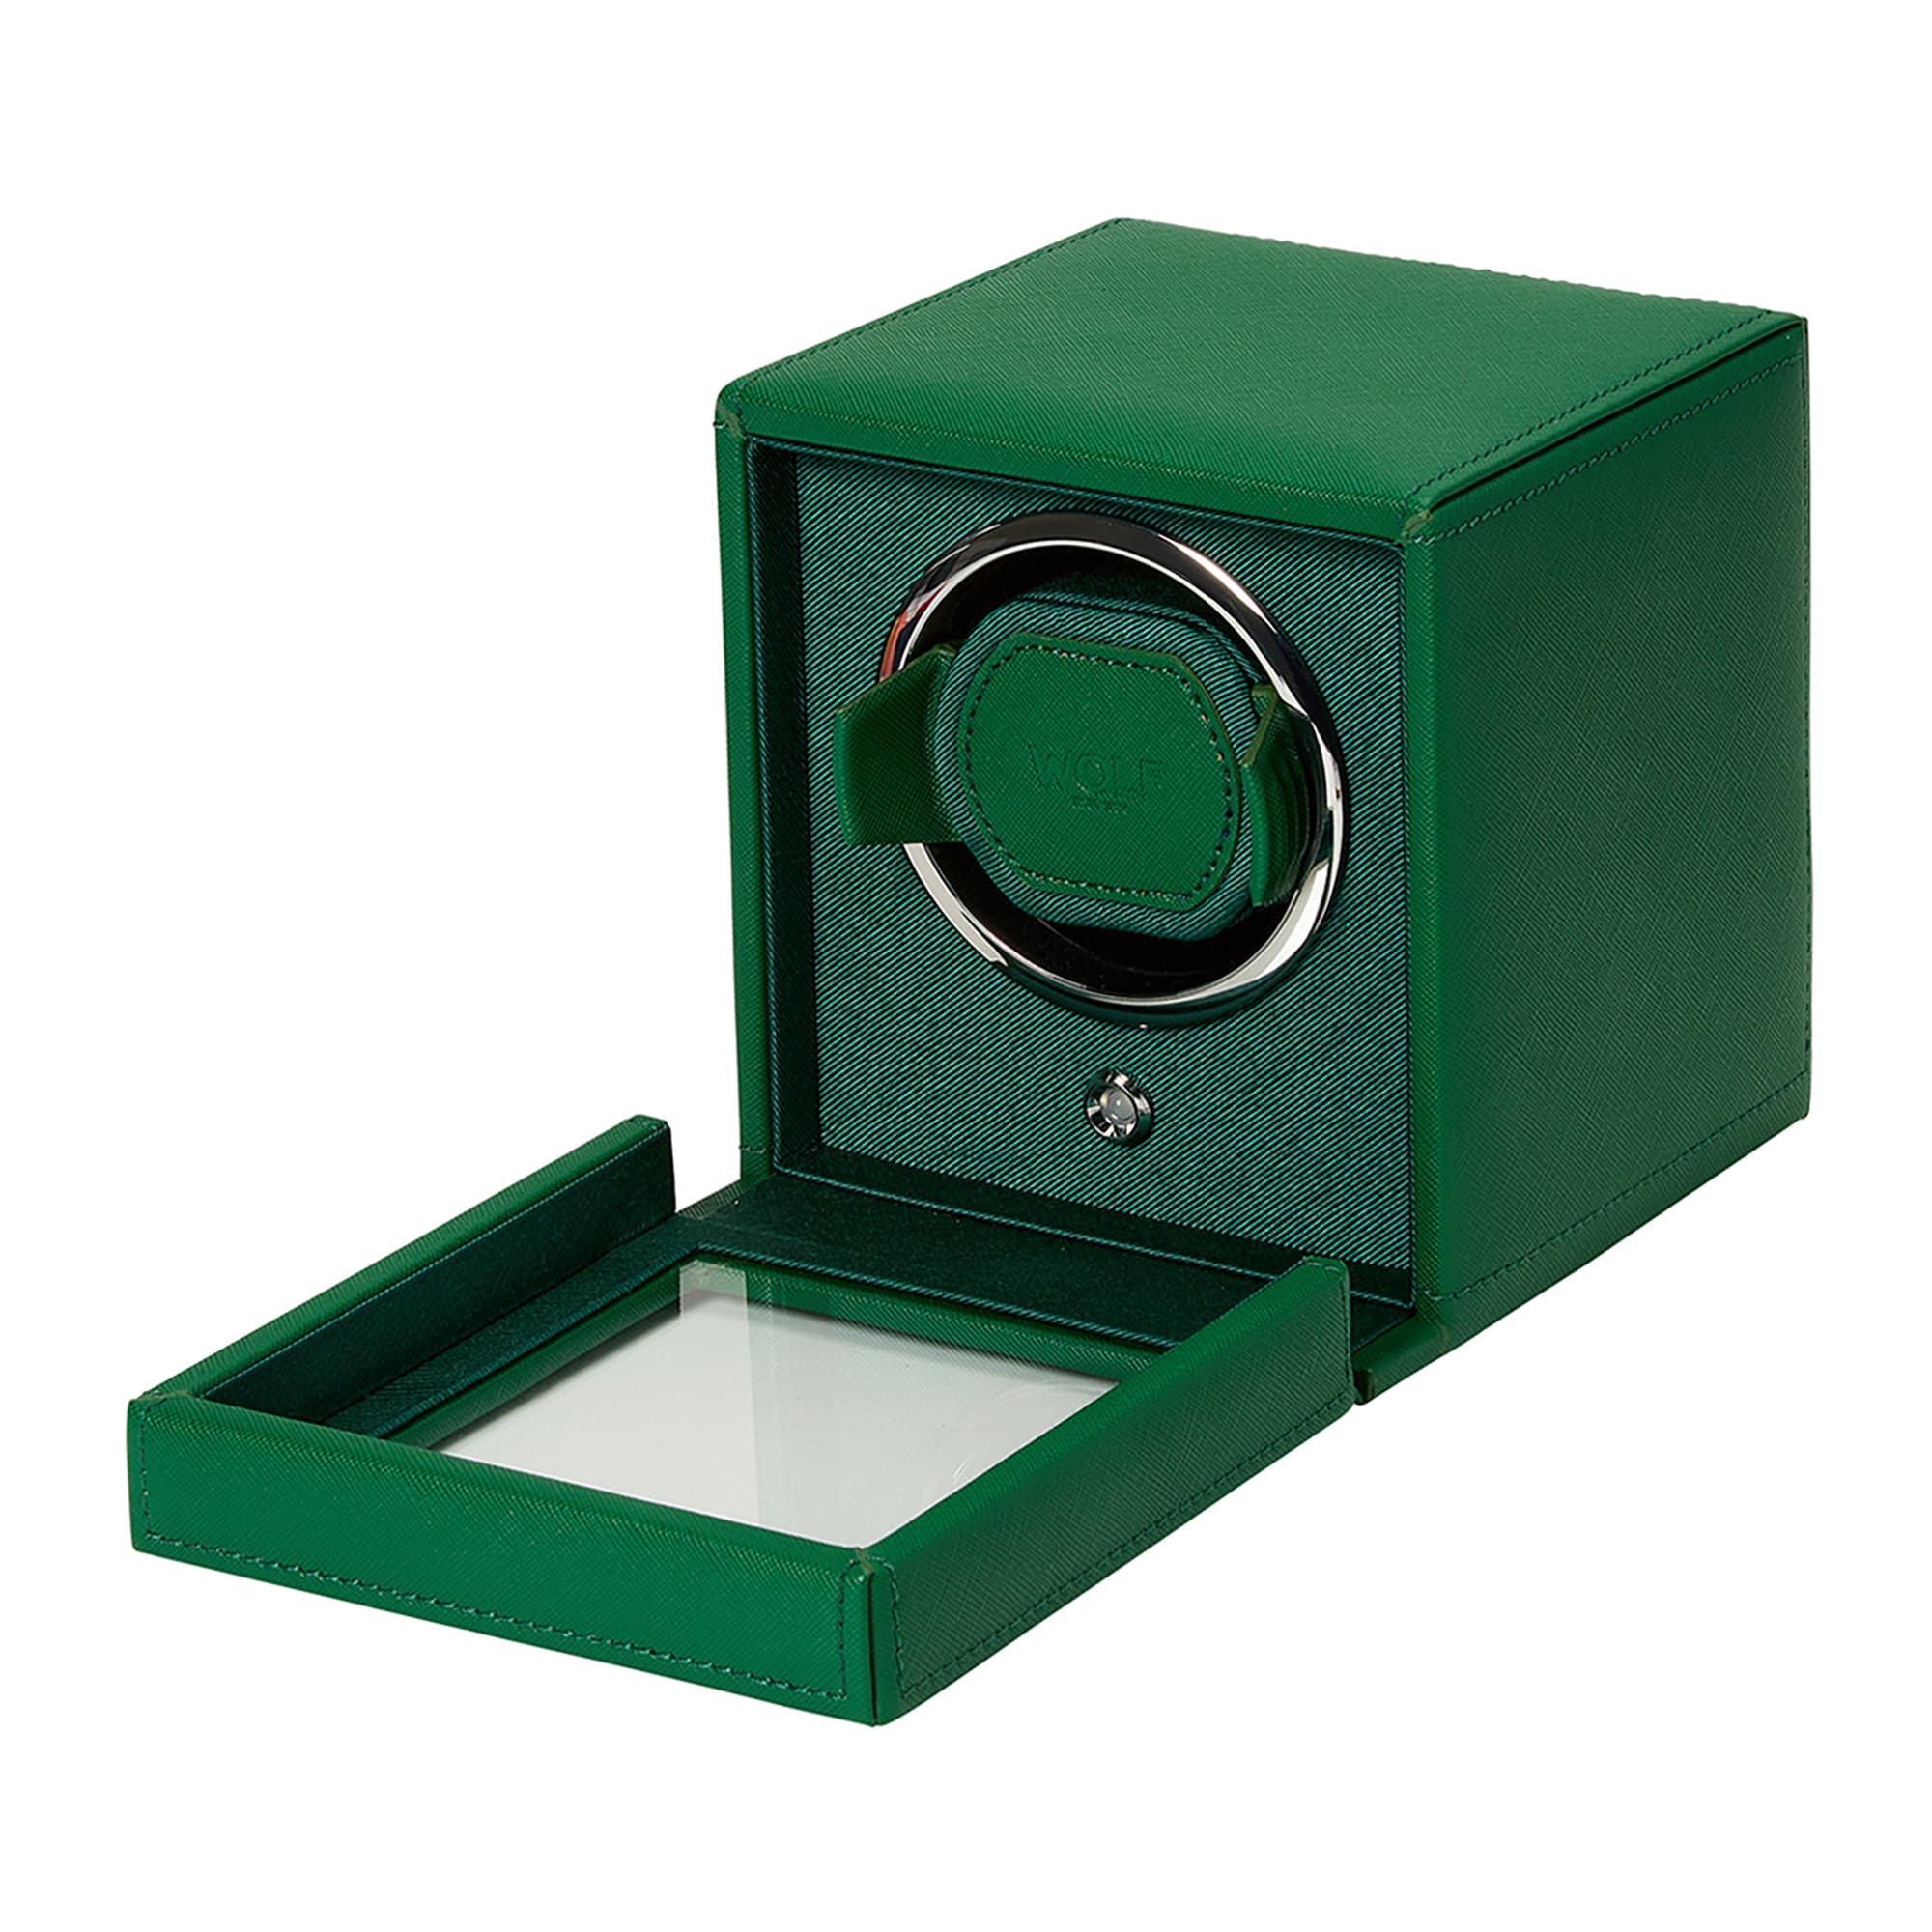 Wolf-Cub-Single-Watch-Winder-with-Cover-Green-461143-3